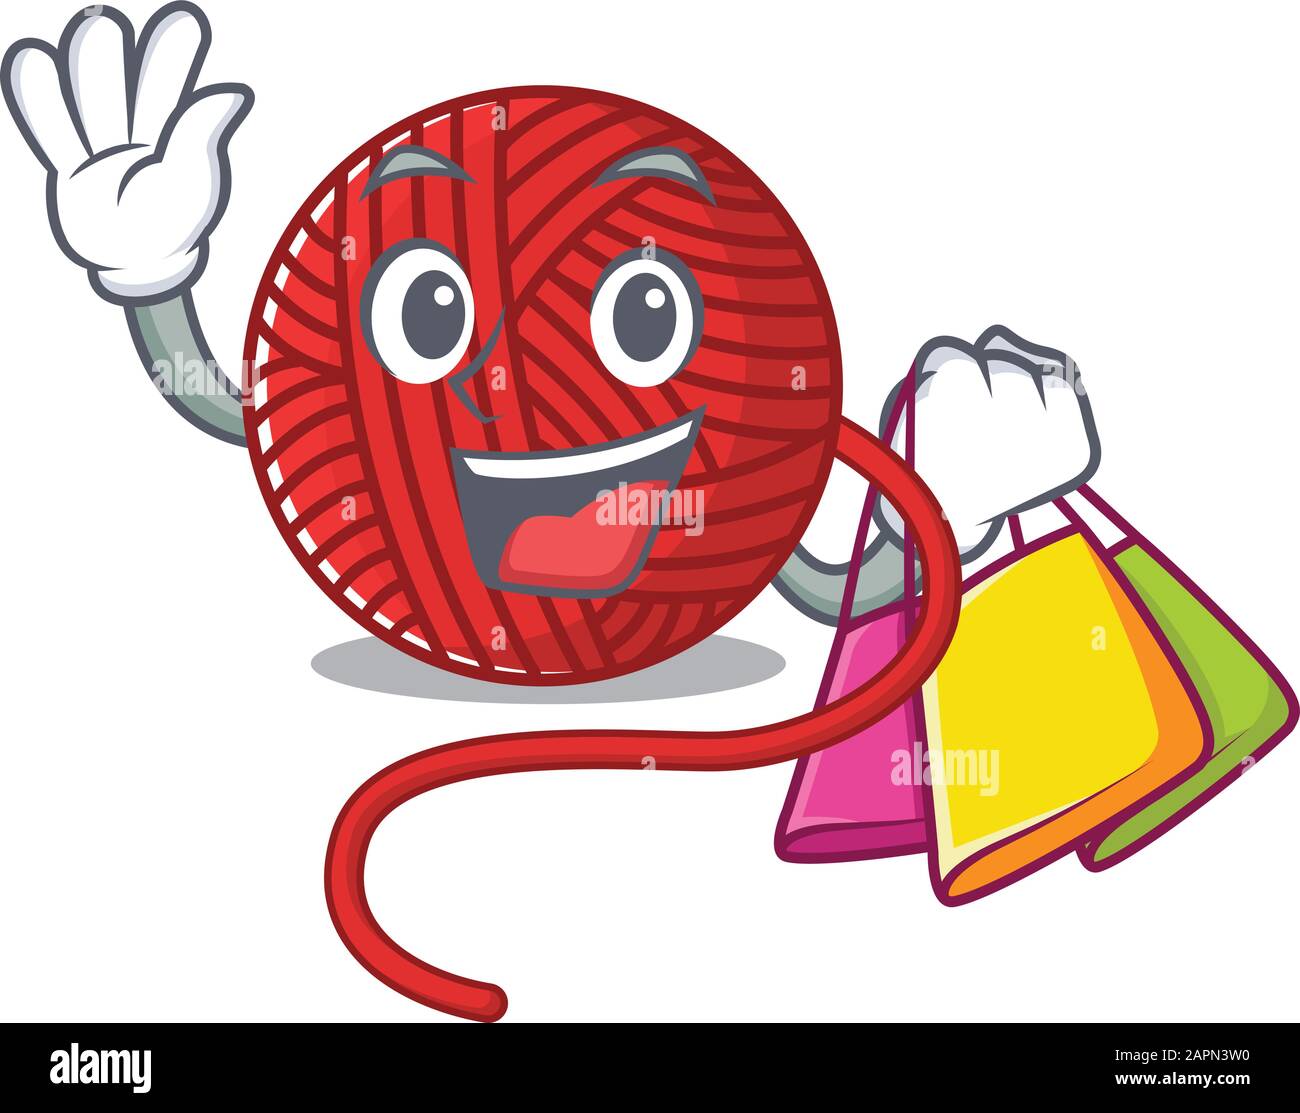 A happy rich red wool yarn waving and holding Shopping bag Stock Vector